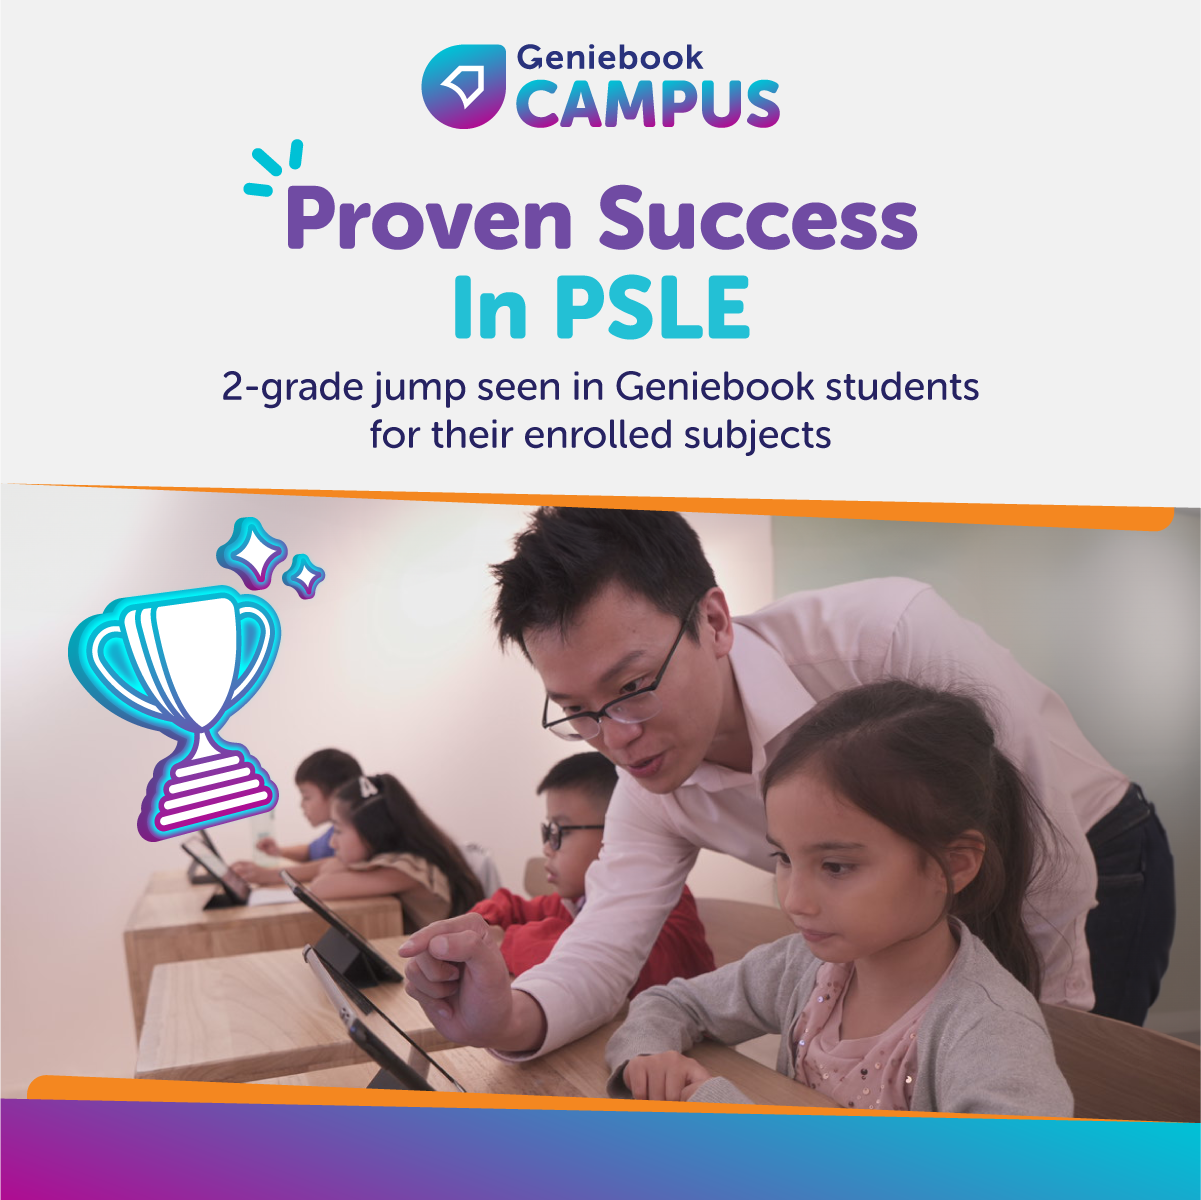 [FREE TRIAL] Register for a Free In-person Trial at Geniebook CAMPUS